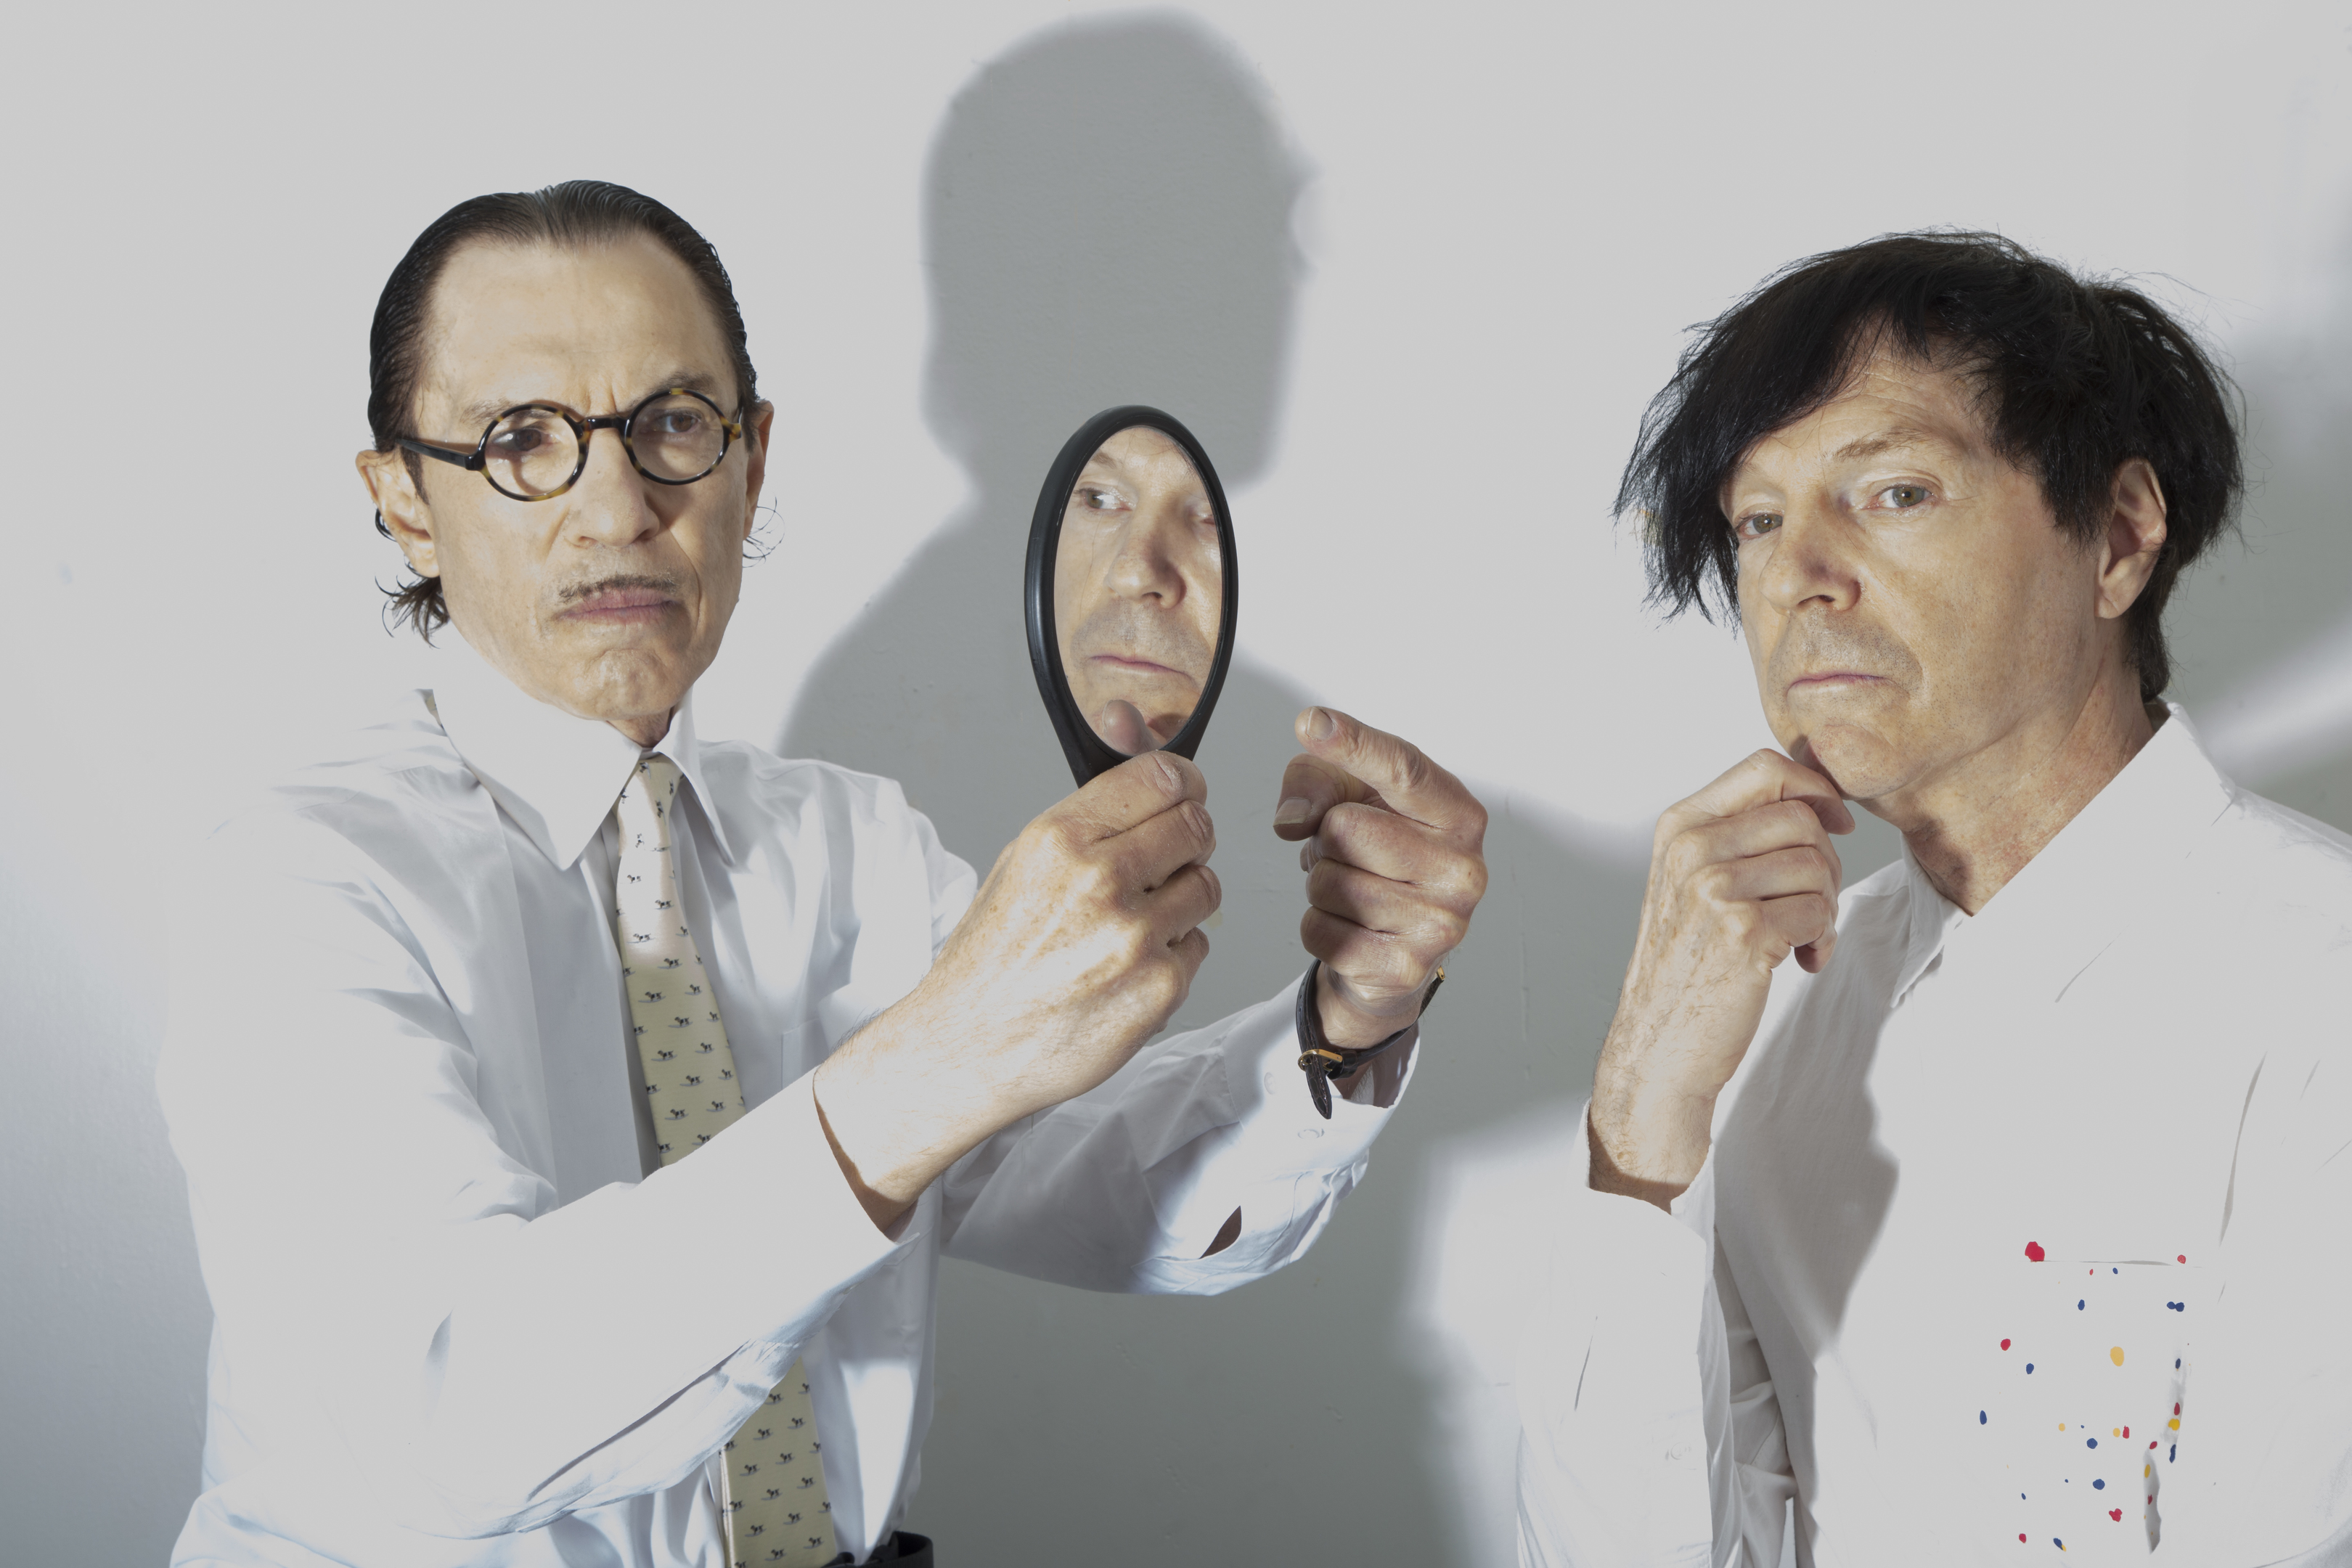 Russell Mael (right) and brother Ron make up Sparks